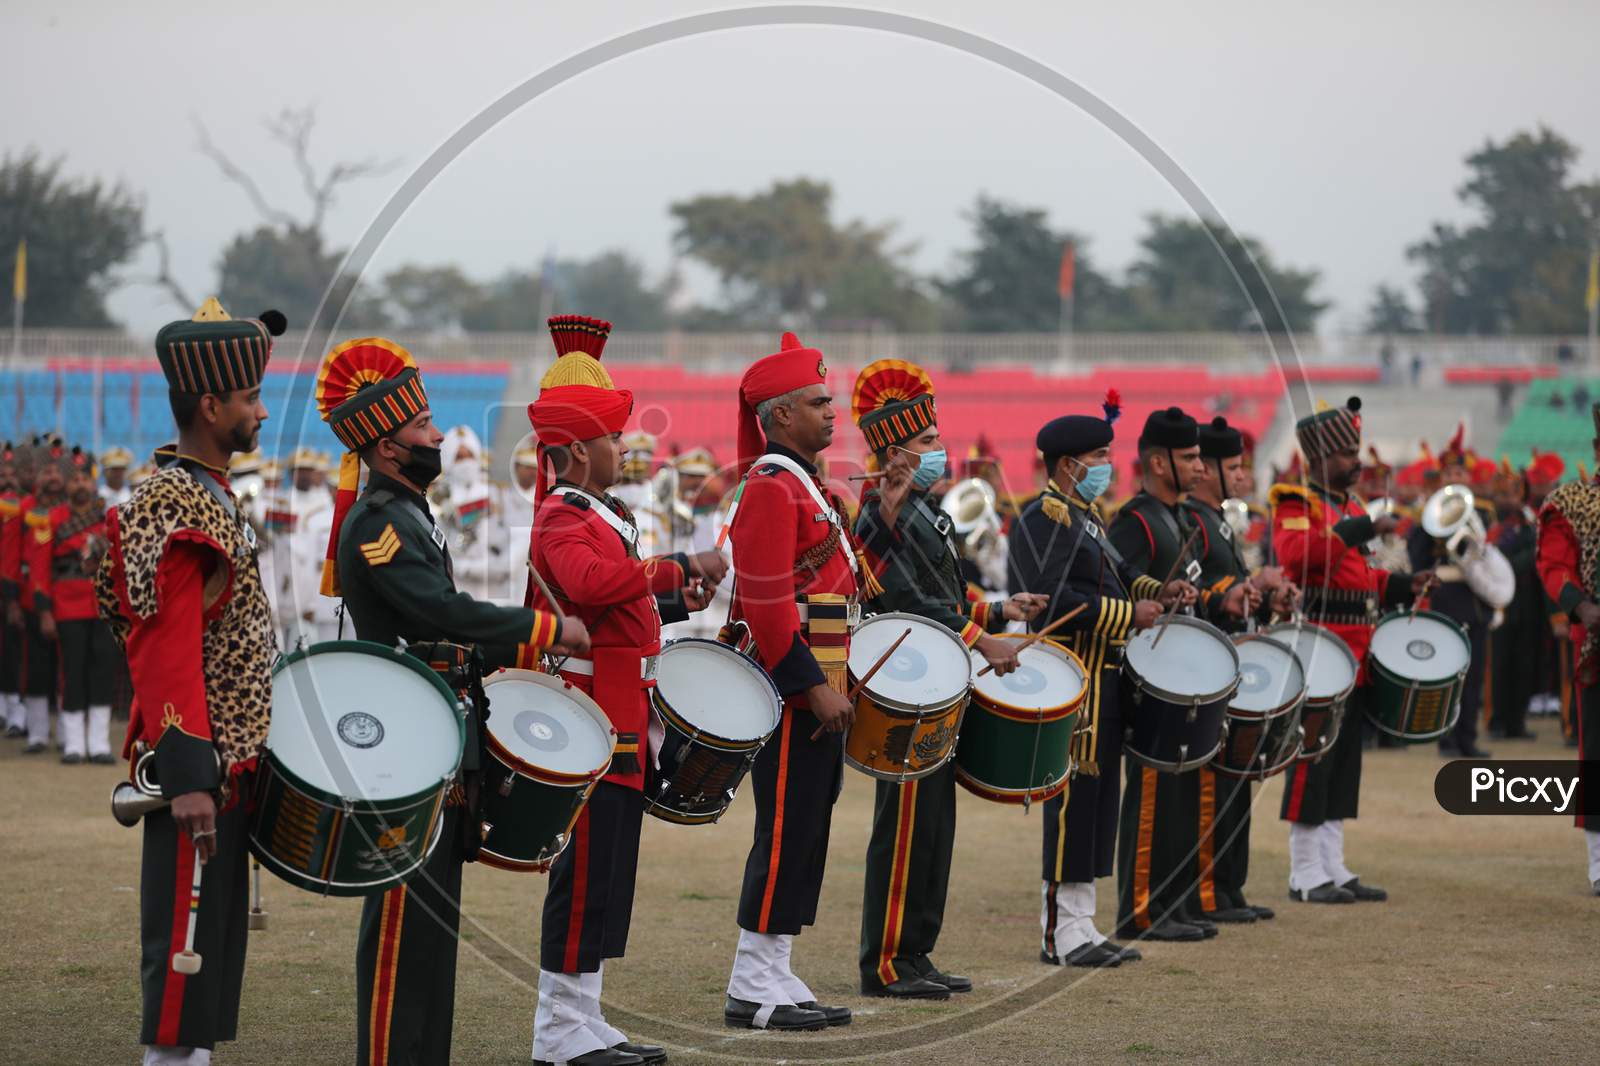 Members of an Indian armed forces band perform during Beating Retreat Ceremony at M A Stadium Jammu ,29,JAN,2021.